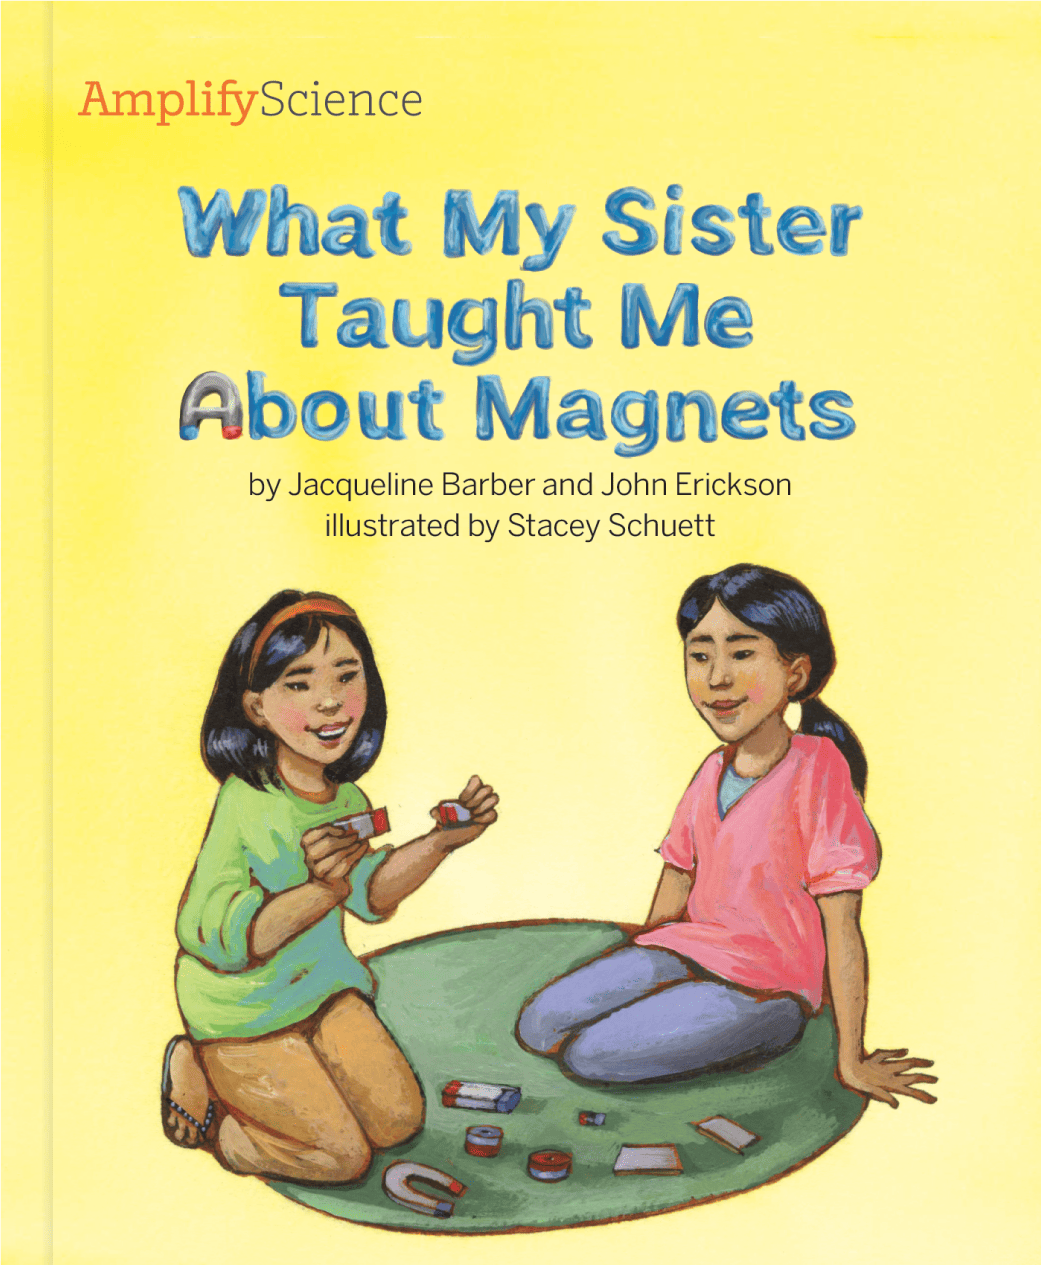 Amplify Science Student Book What My Sister Taught Me About Magnets